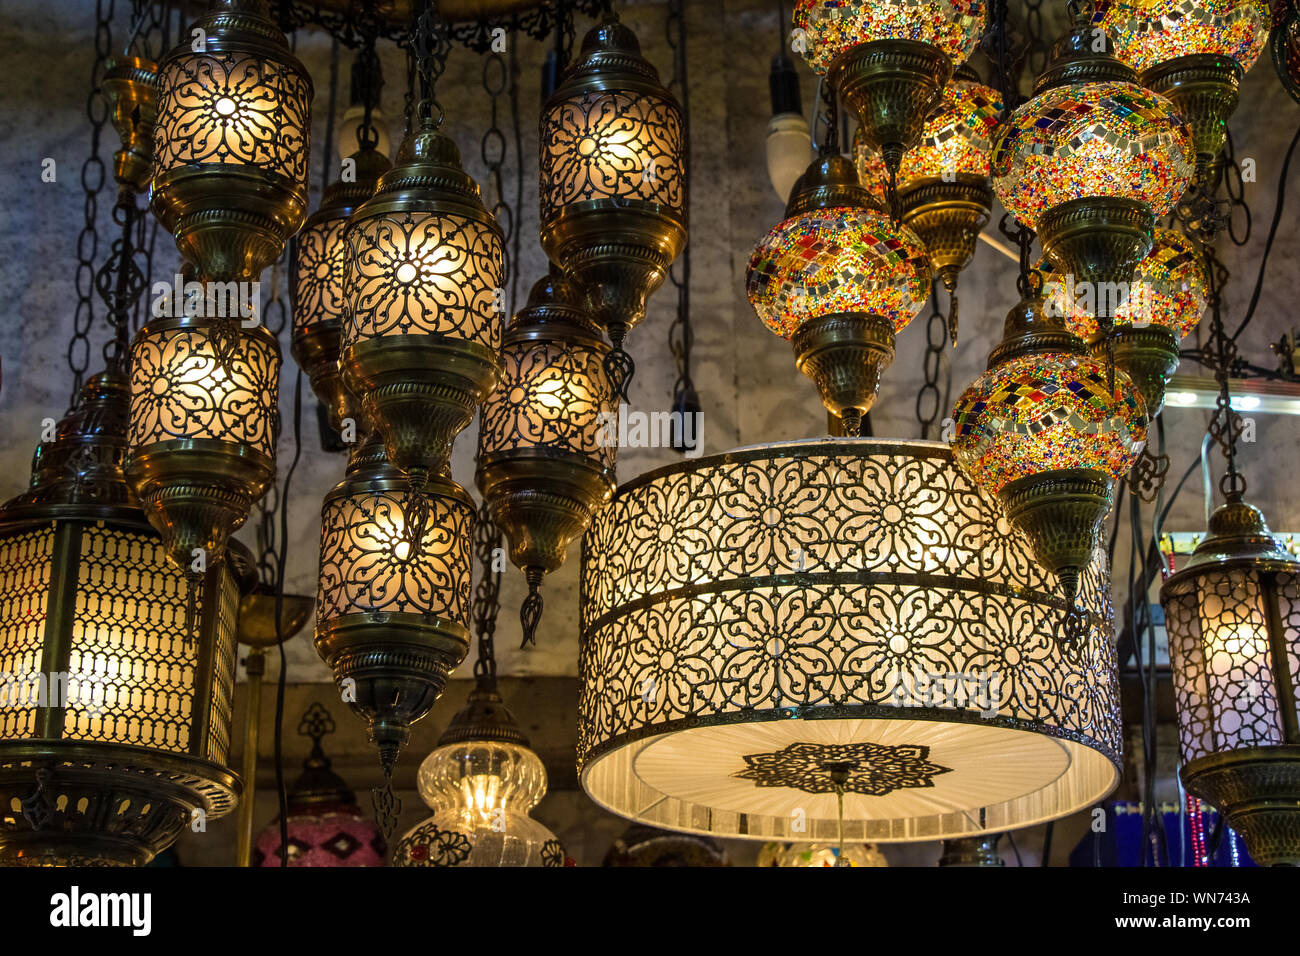 Ottoman style colorful mosaic lamps in Istanbul Turkey Stock Photo - Alamy